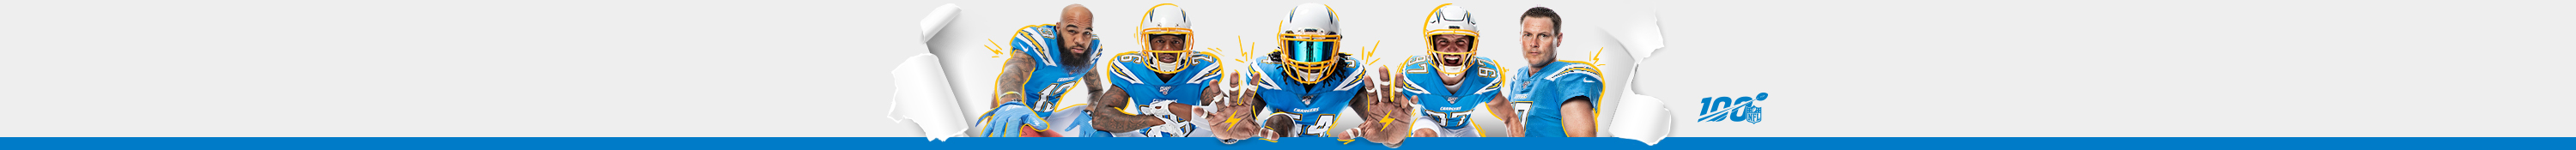 Los Angeles Chargers Depth Chart